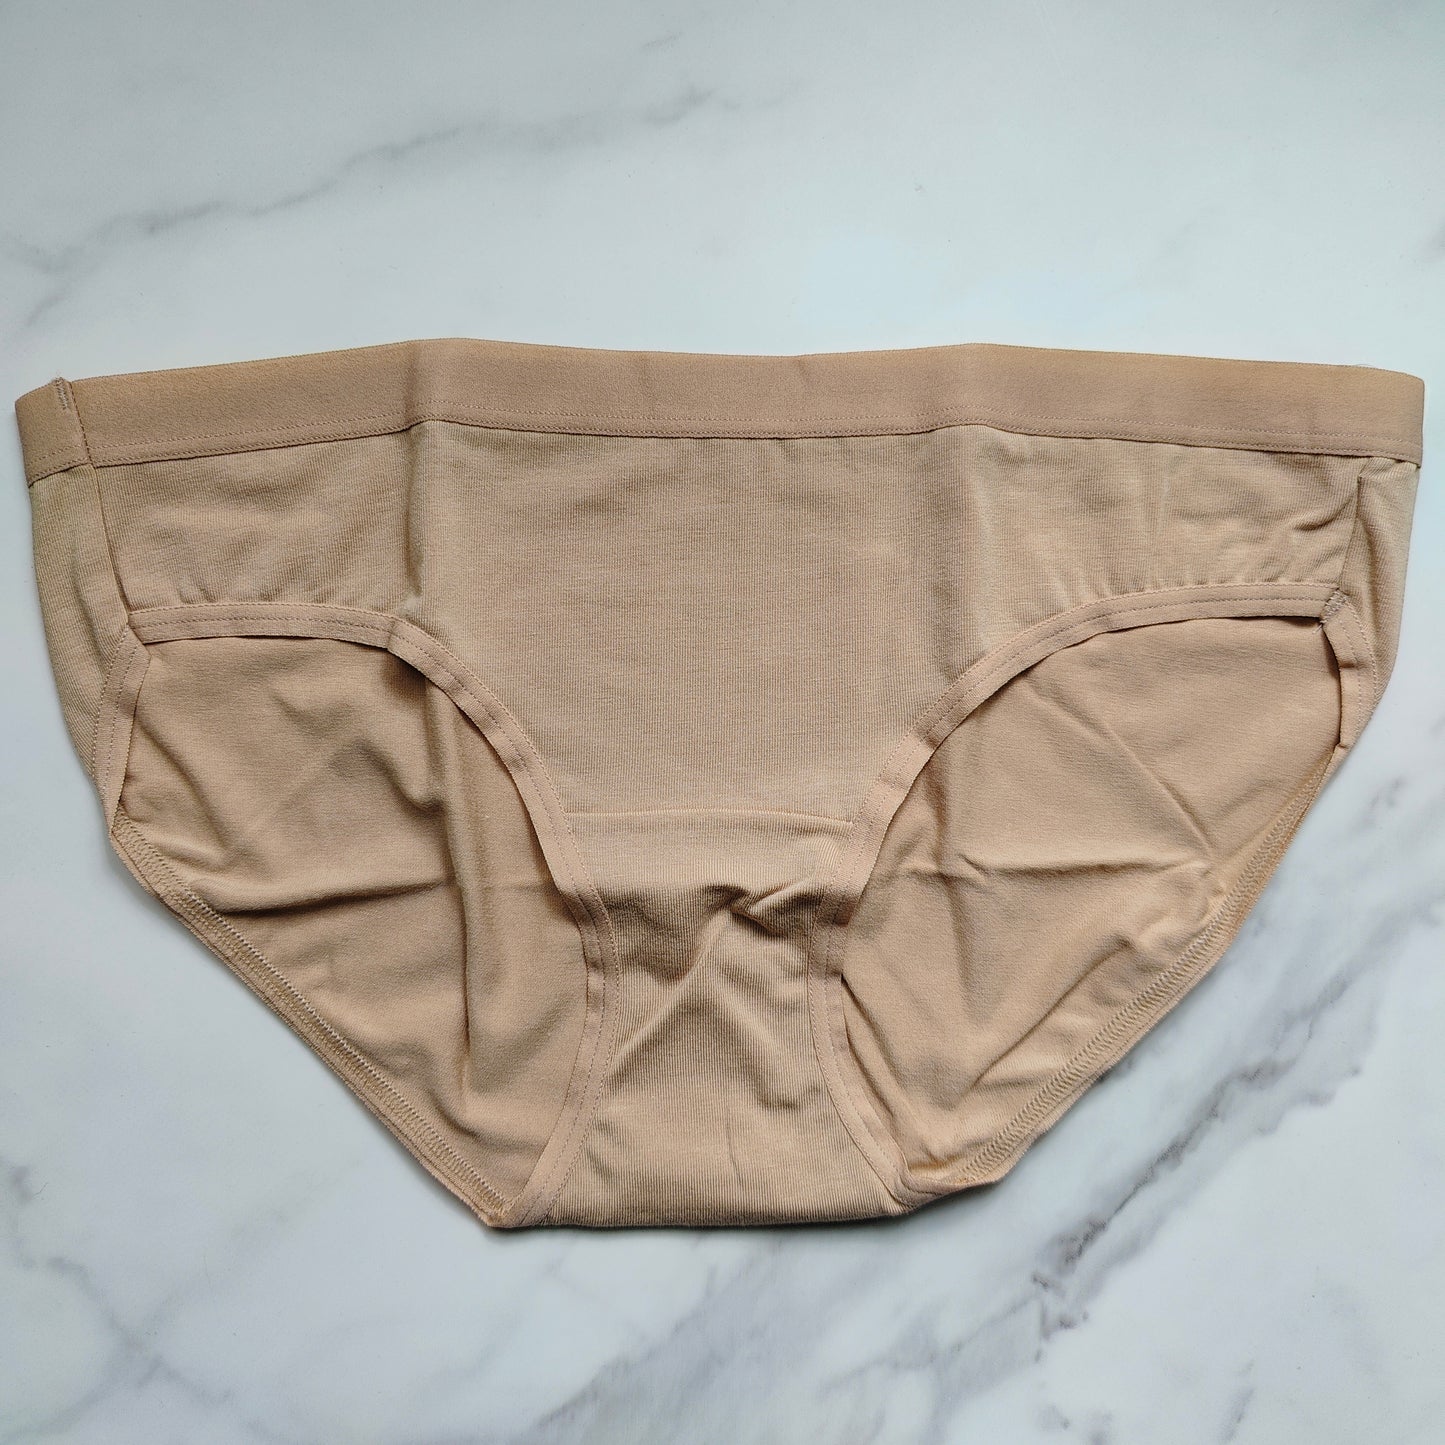 Cotton Modal Tailored Hipster Panty